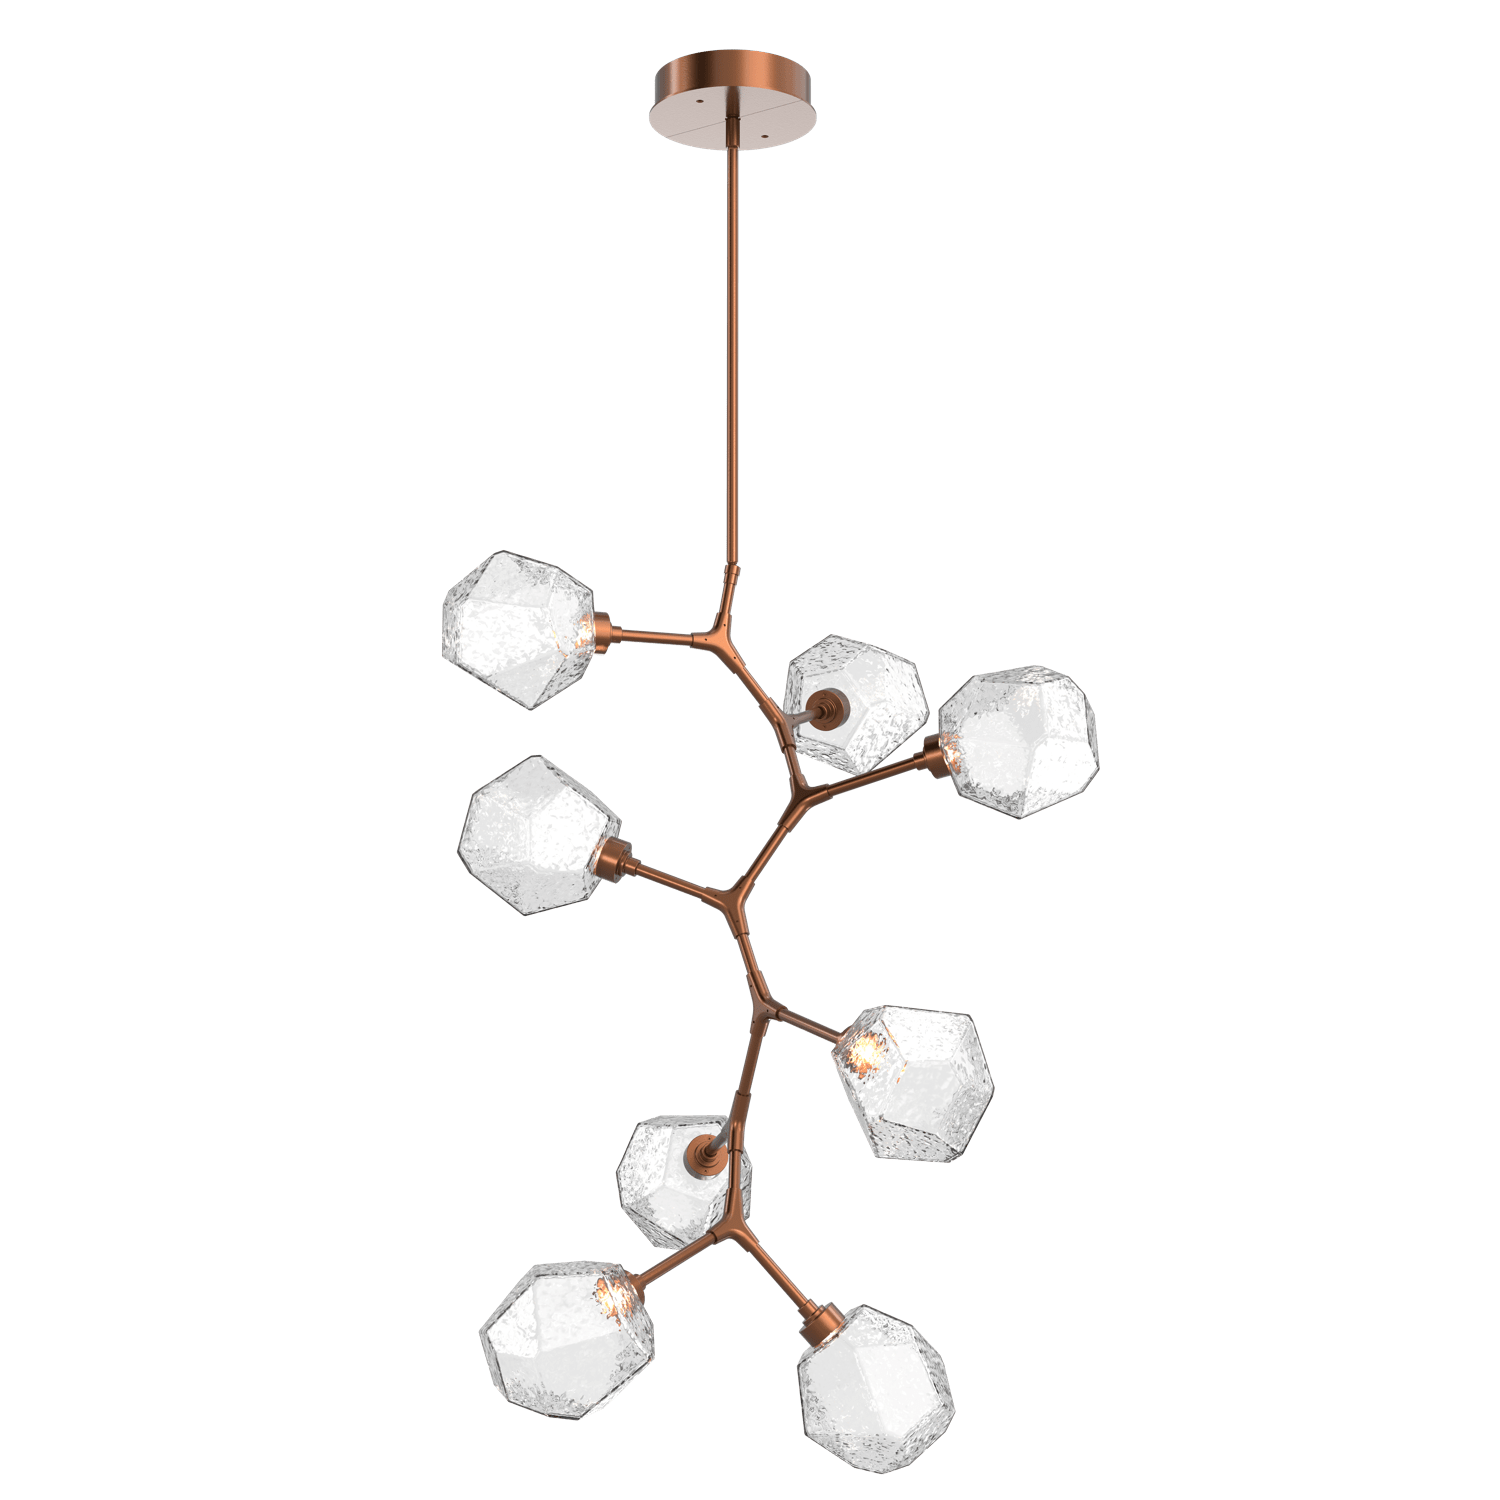 CHB0039-VB-BB-C-Hammerton-Studio-Gem-8-light-modern-vine-chandelier-with-burnished-bronze-finish-and-clear-blown-glass-shades-and-LED-lamping